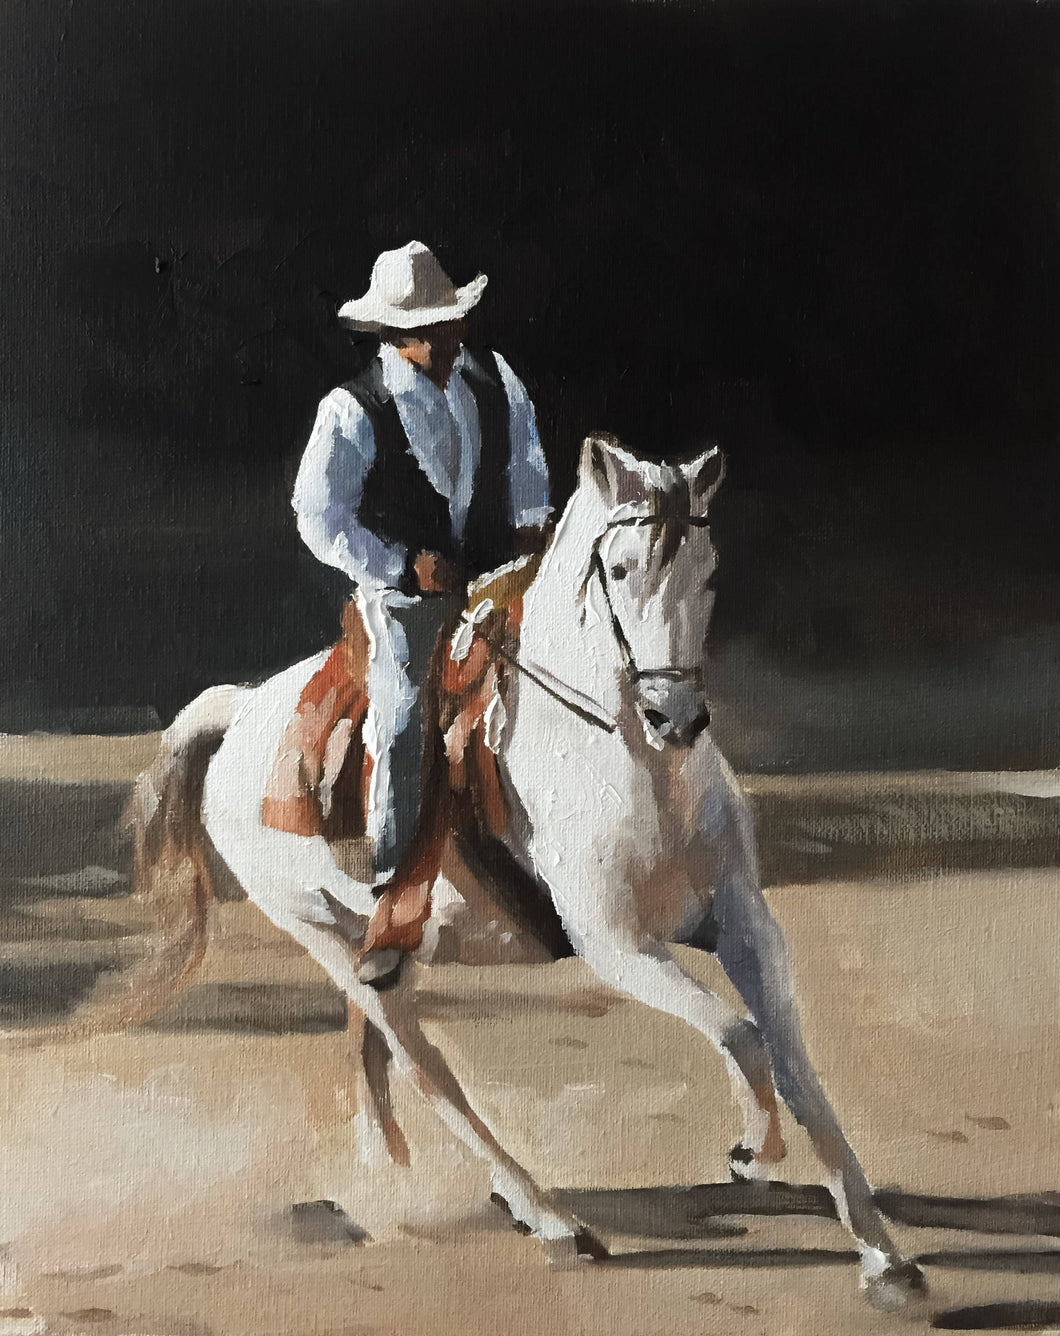 Horse Riding Painting, Prints, Canvas, Posters, Originals, Commissions - Fine Art - from original oil painting by James Coates